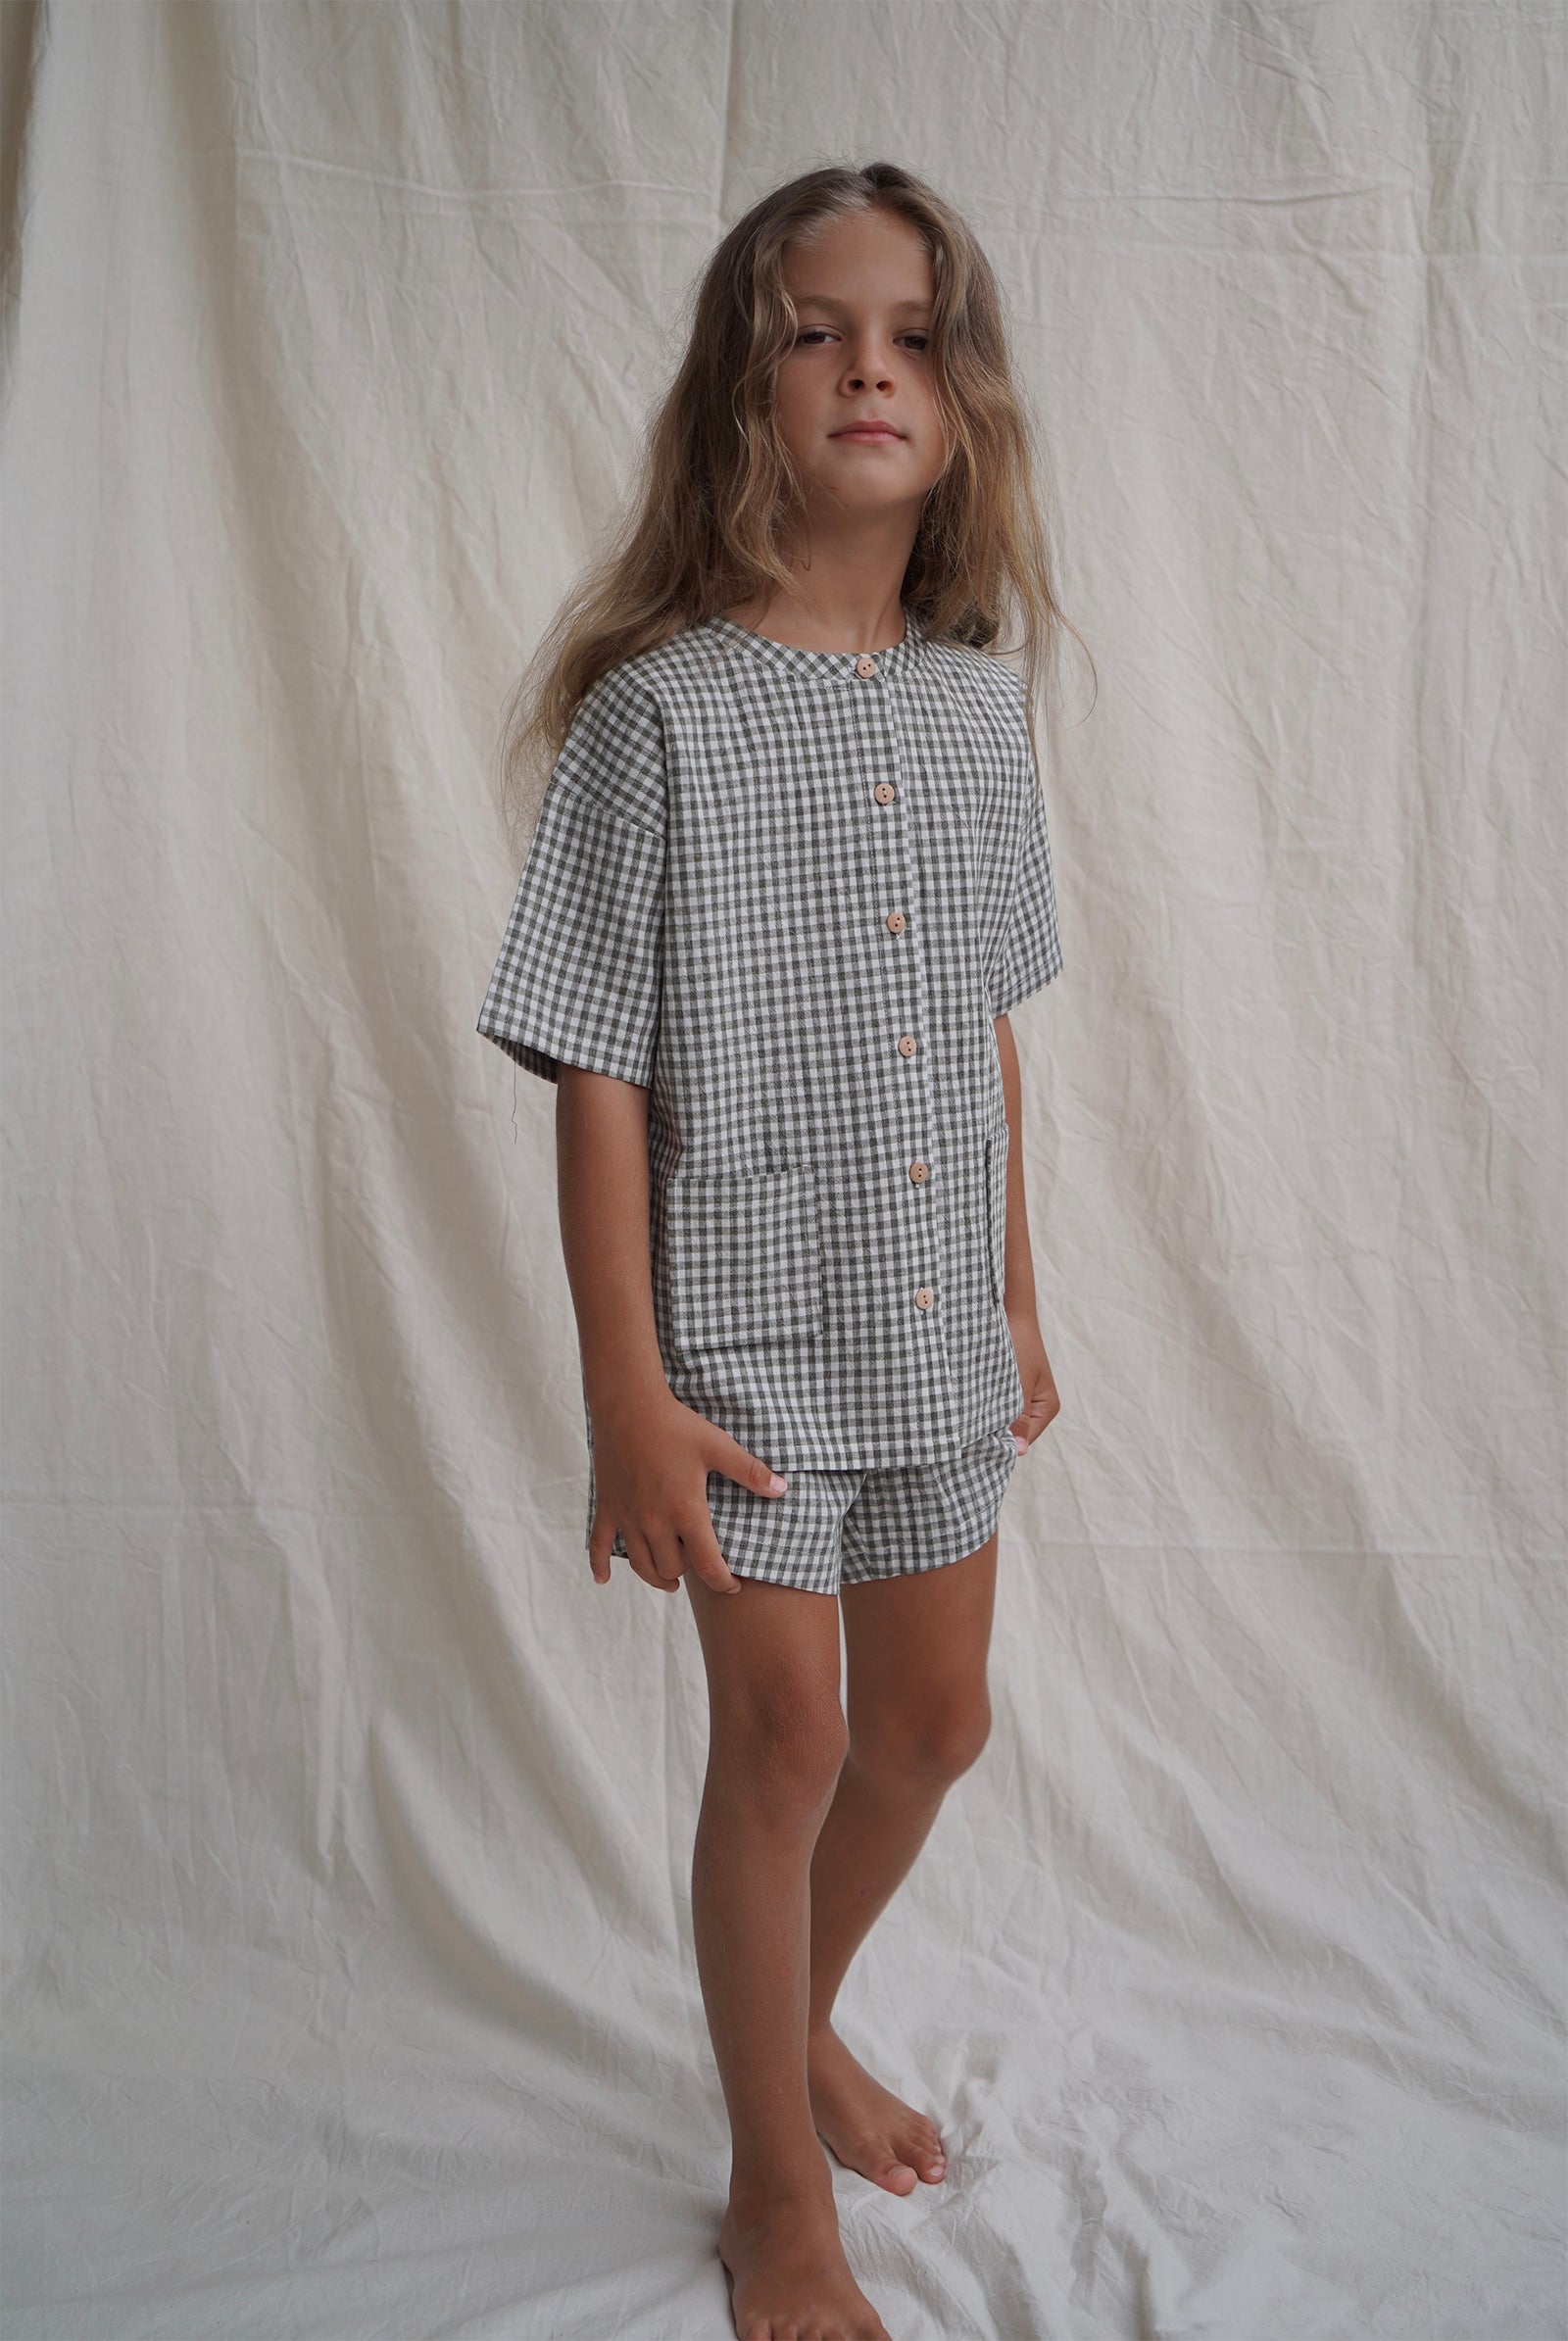 House of Paloma Pascal Kid's Short Sleeve Top Olive Gingham NEW